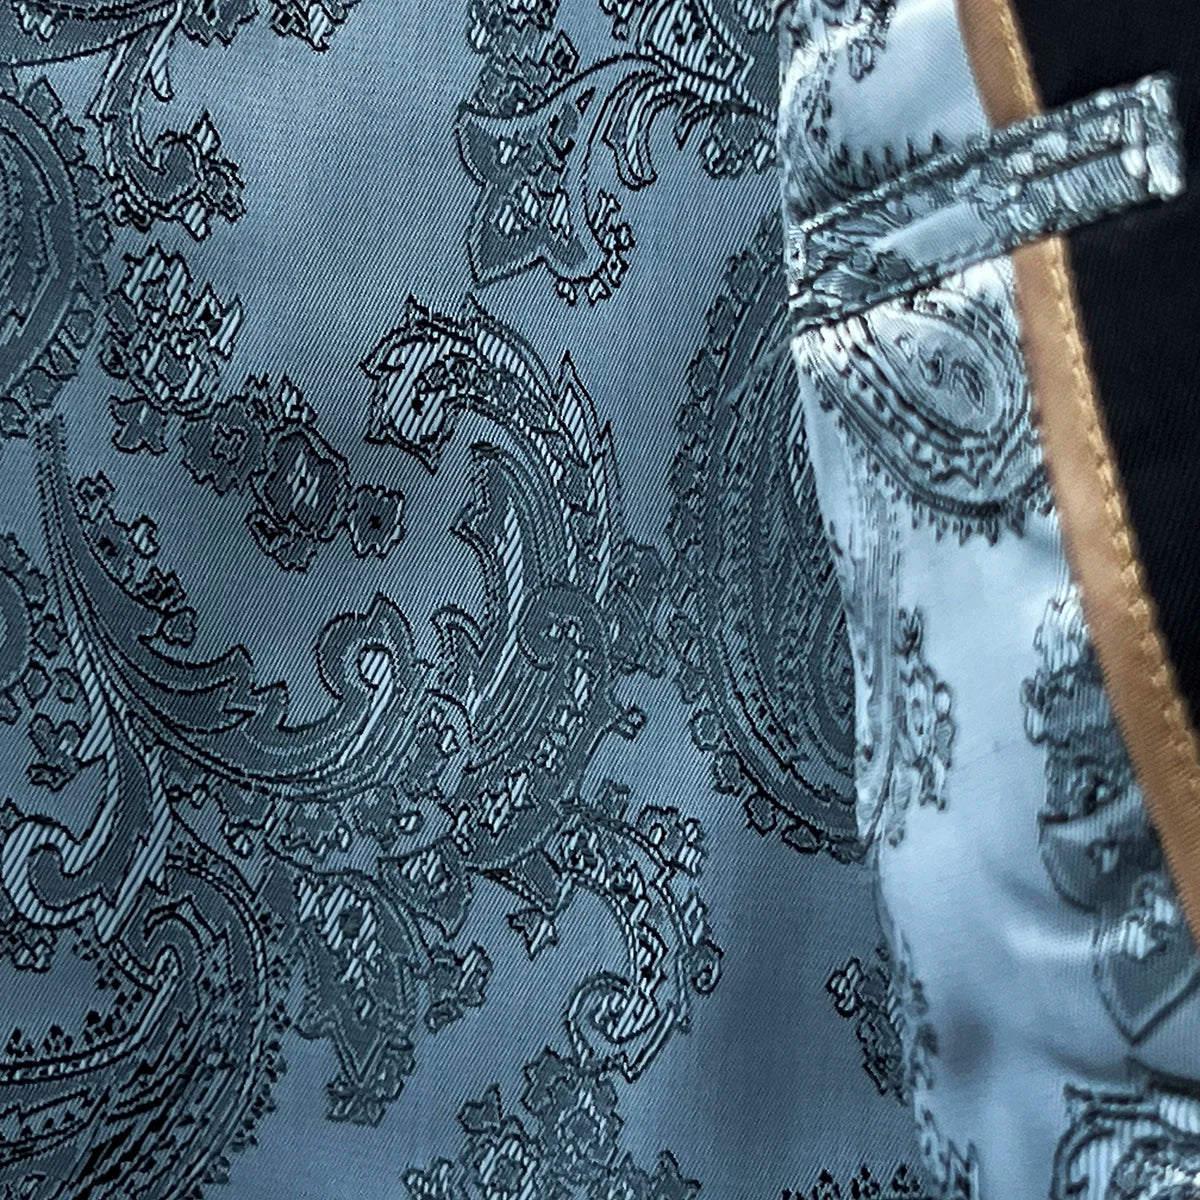 Interior shot of a black Vitale Barberis Canonico suit jacket, focusing on the vibrant silver paisley flash linings.